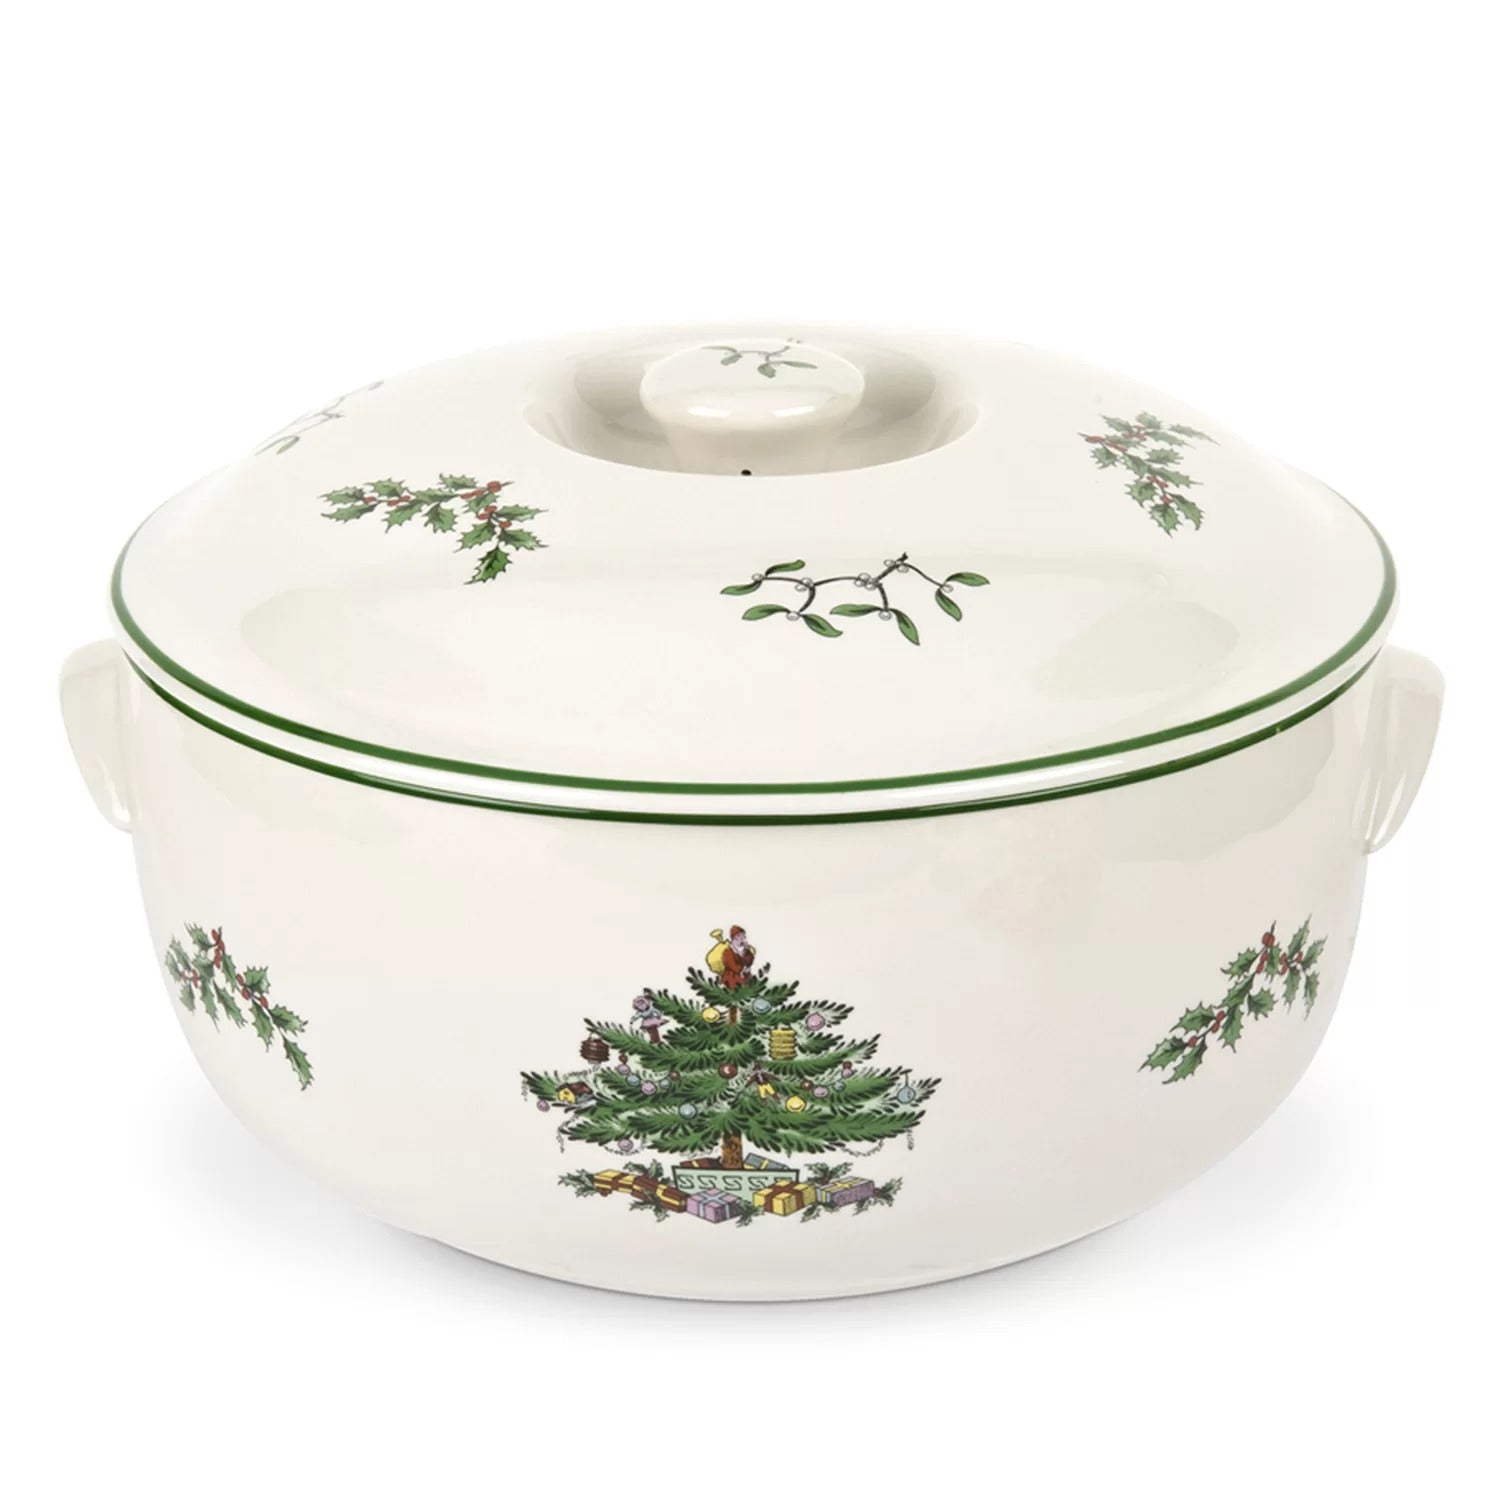 Spode Christmas Tree Casserole 2 pints with cover - Royal Gift